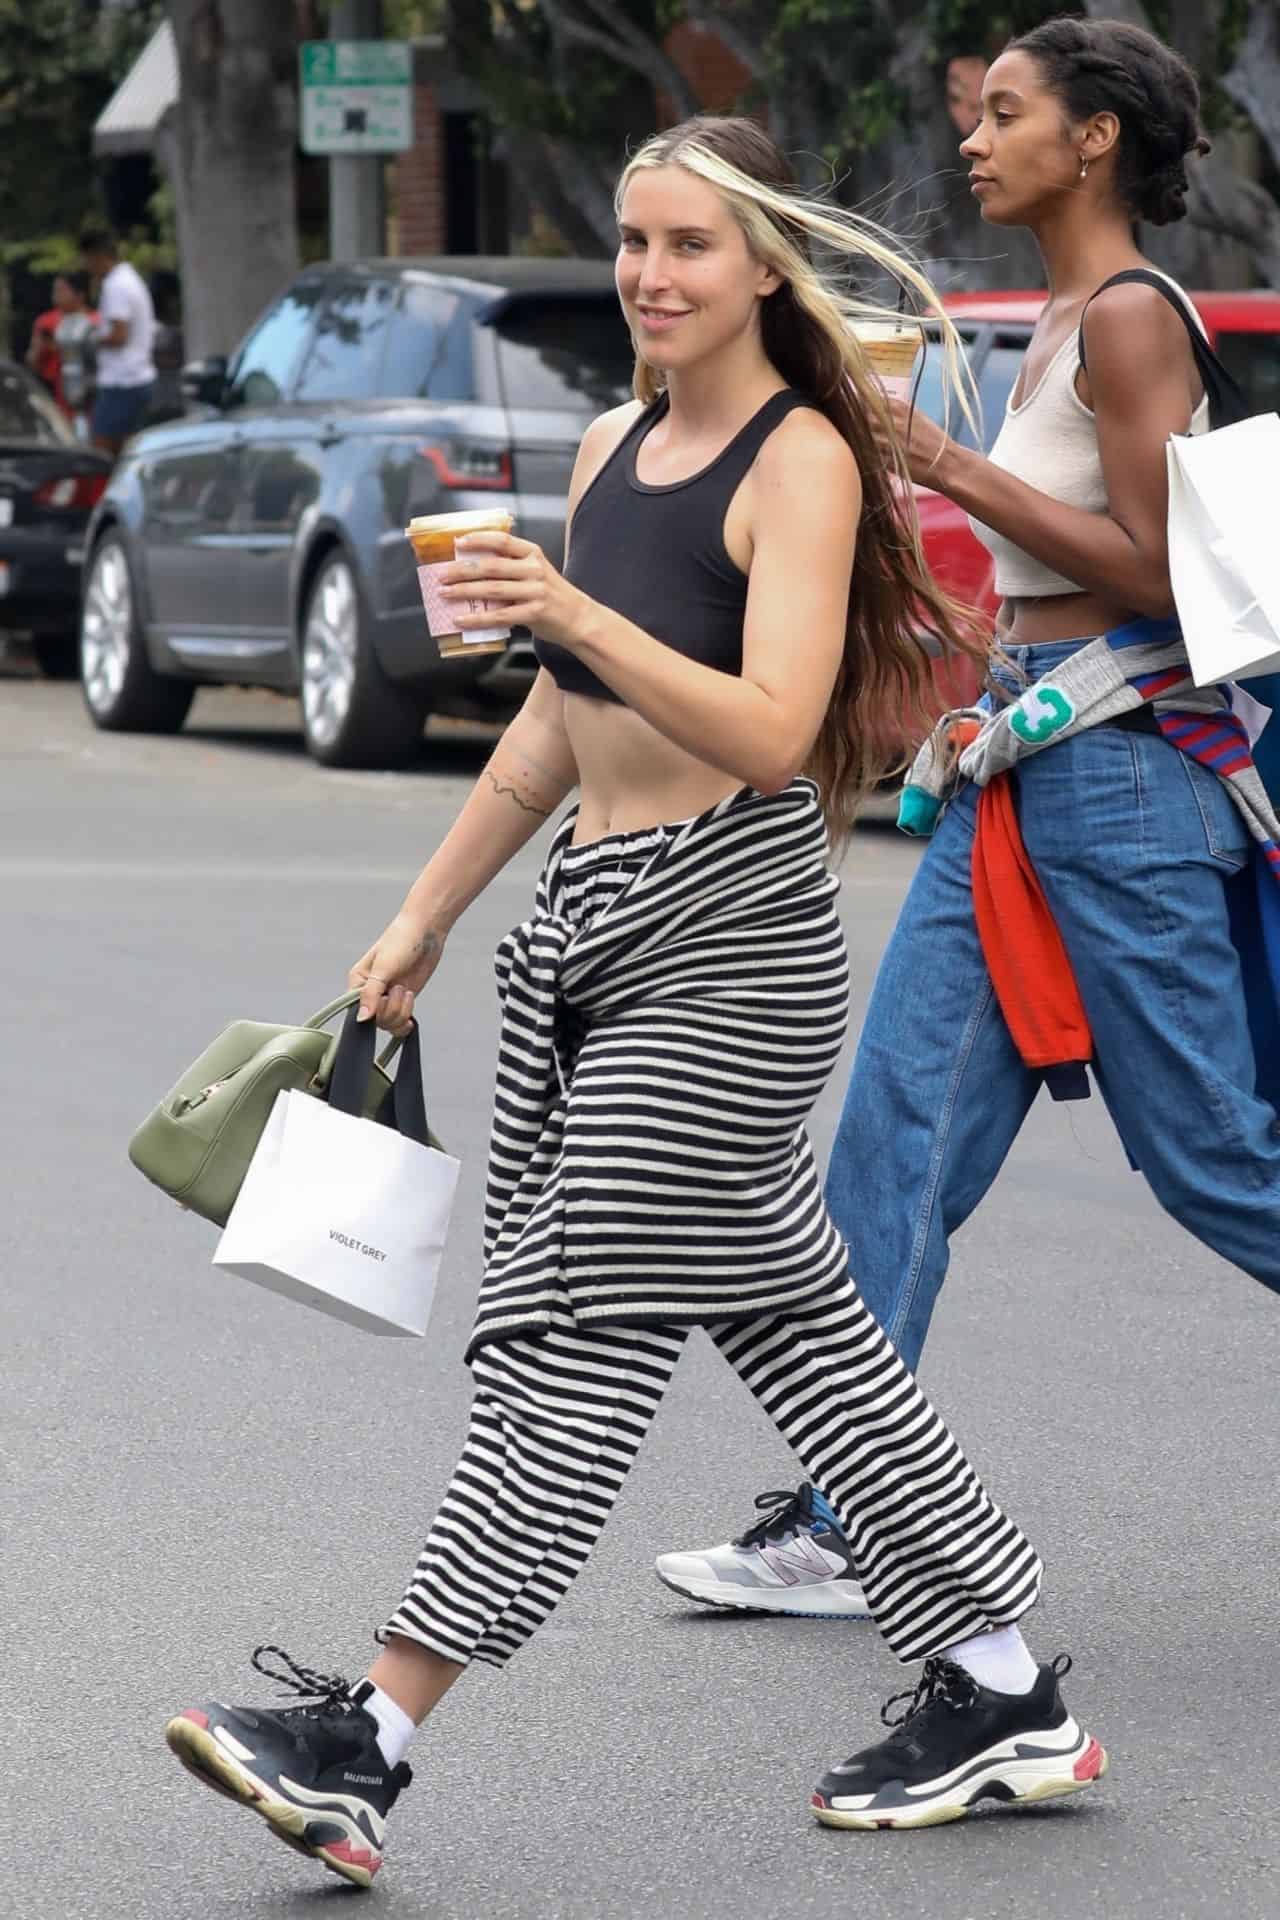 Scout Willis is Chic in Striped Pants and a Black Yoga Top in WeHo